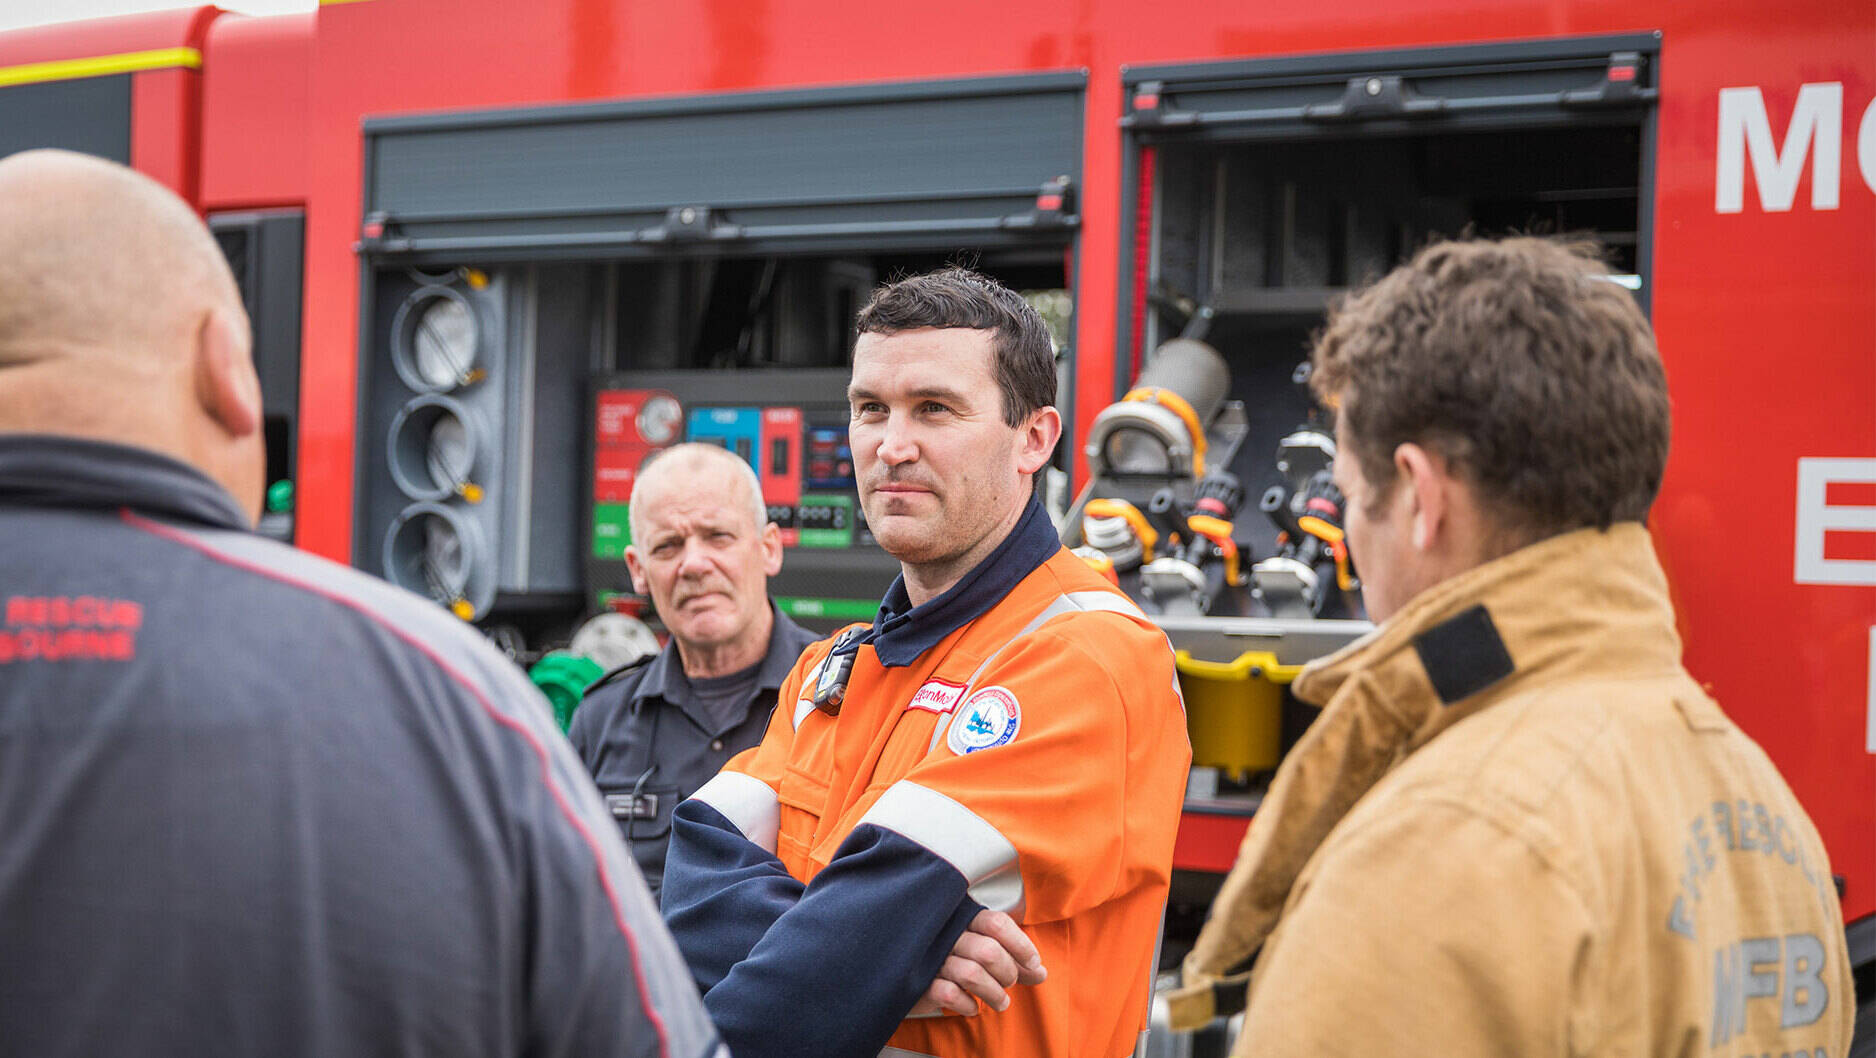 Image Photo— Altona Refinery Emergency Response  Security Lead and Fire Chief Simon Thomas (pictured centre): “We continually work with organisations such as the MFB to ensure we are well-prepared to protect the environment, our neighbours and our workforce, as well as the environment, in the event of an incident at our site.”